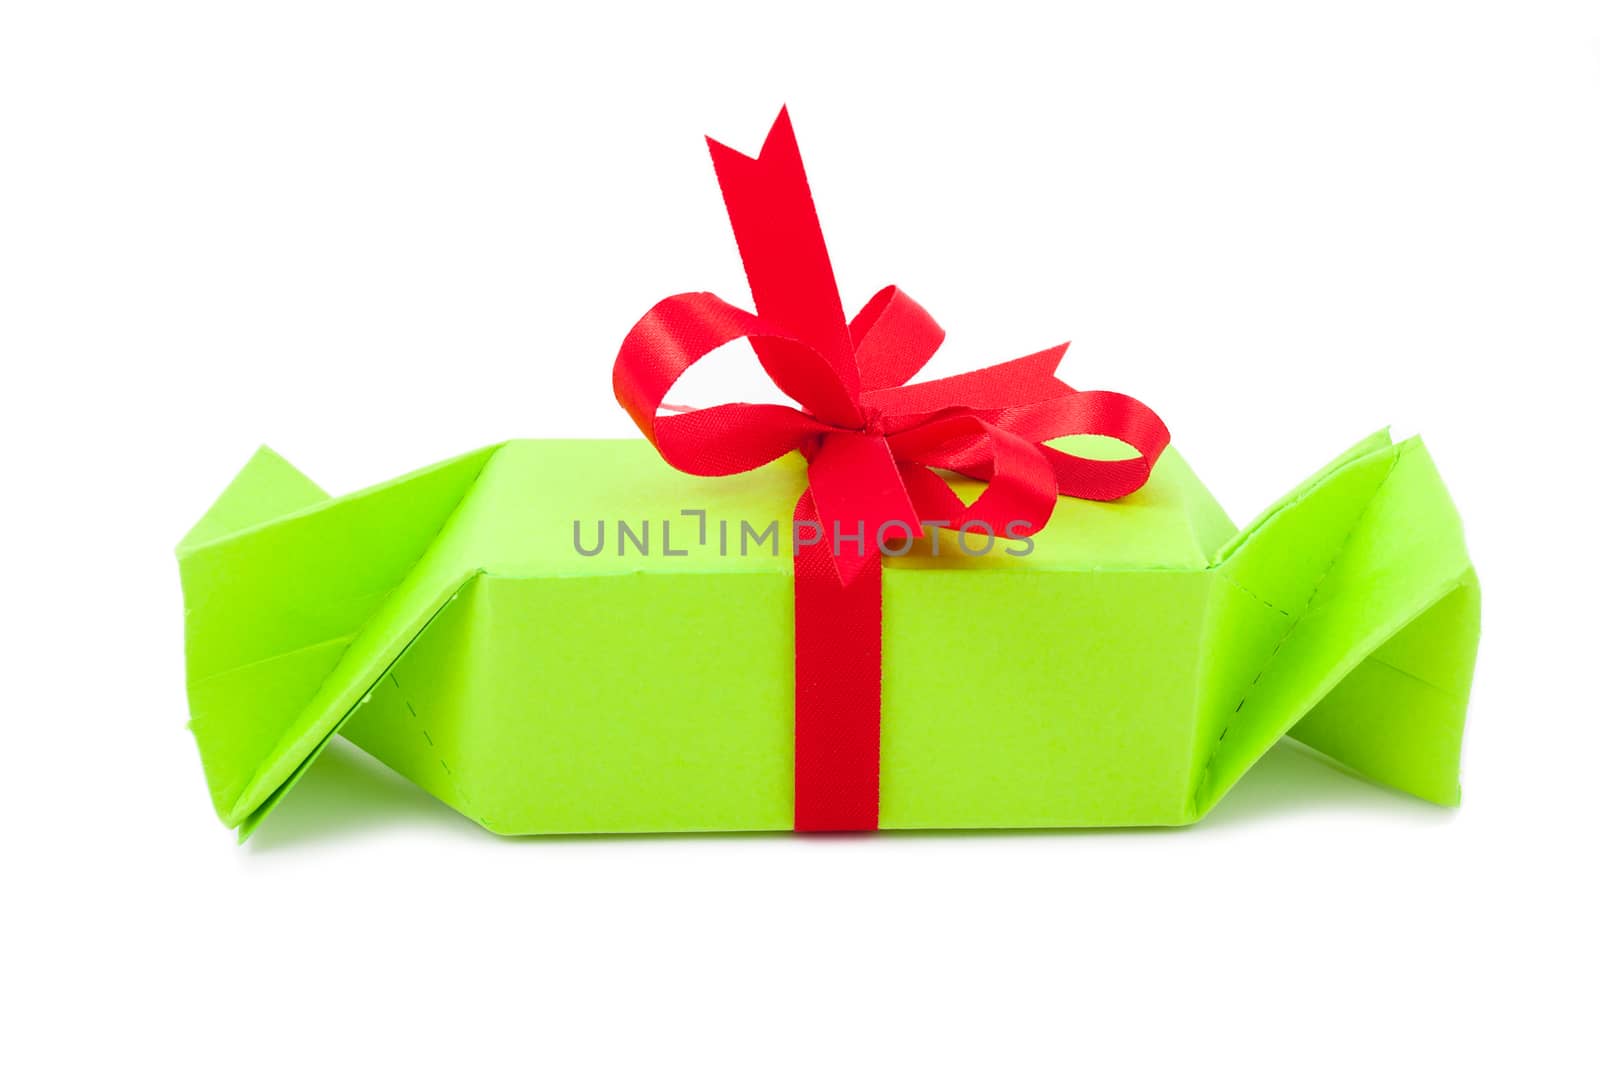 Luxury gift box with satin ribbon and bow isolated over white background.